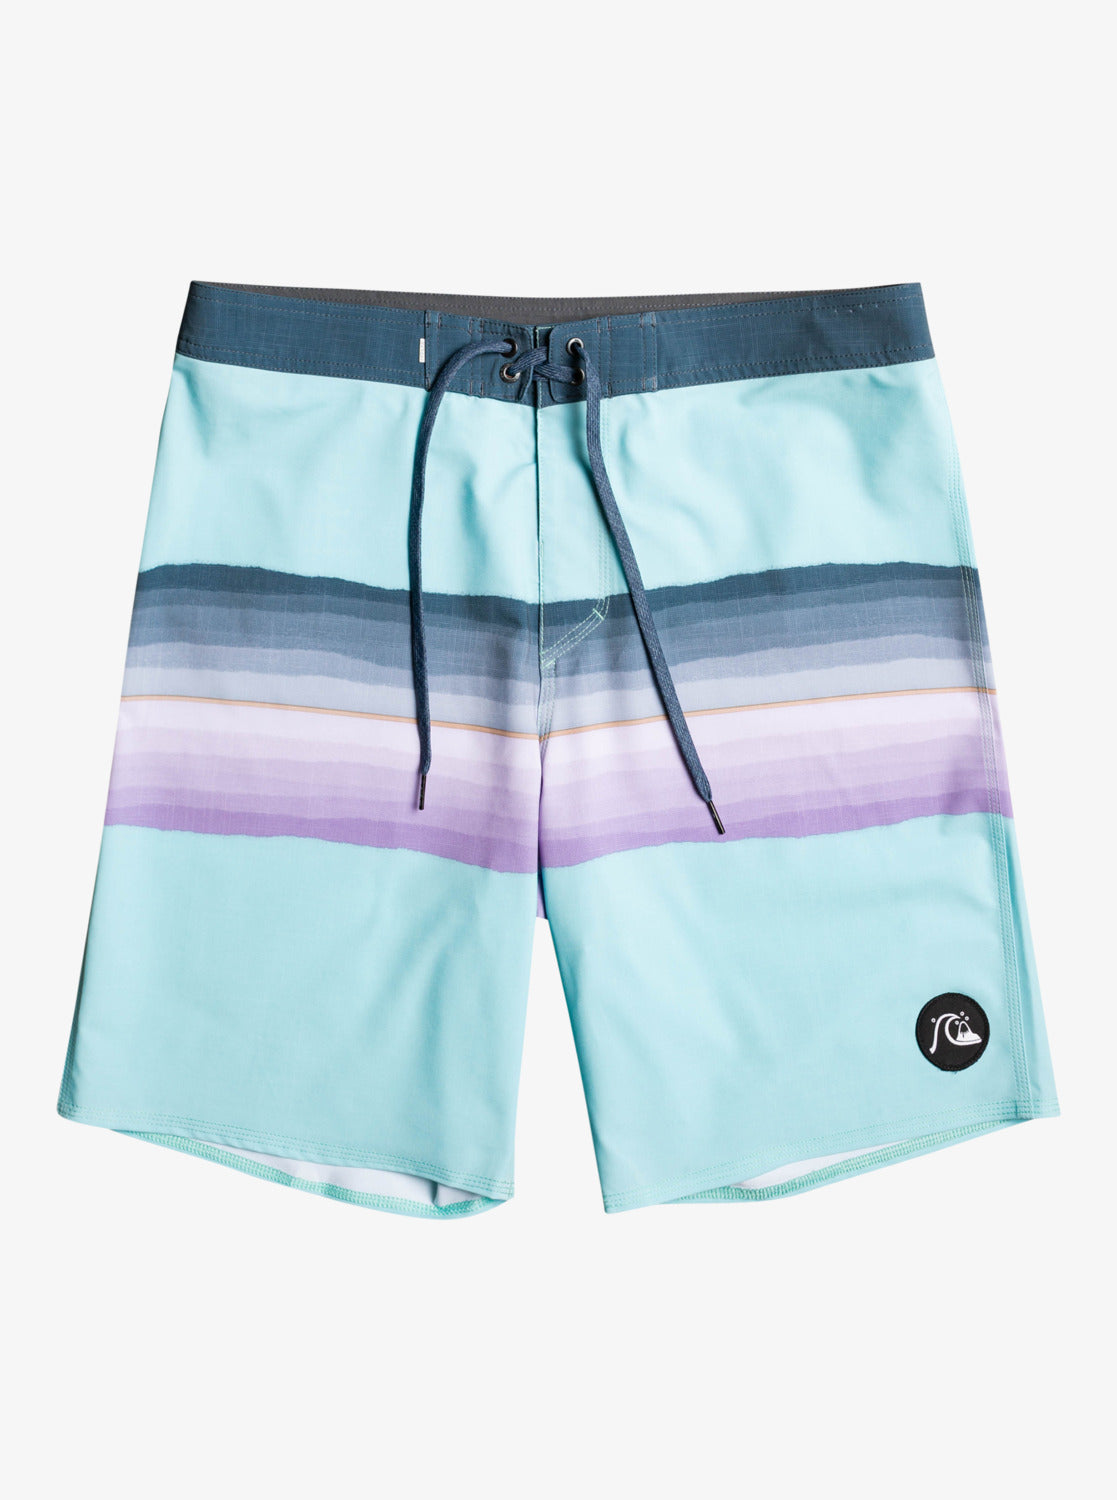 Quiksilver SurfSilk Resin Tint 19" Boardshorts  Style EQYBS04657 Color Code bgd9